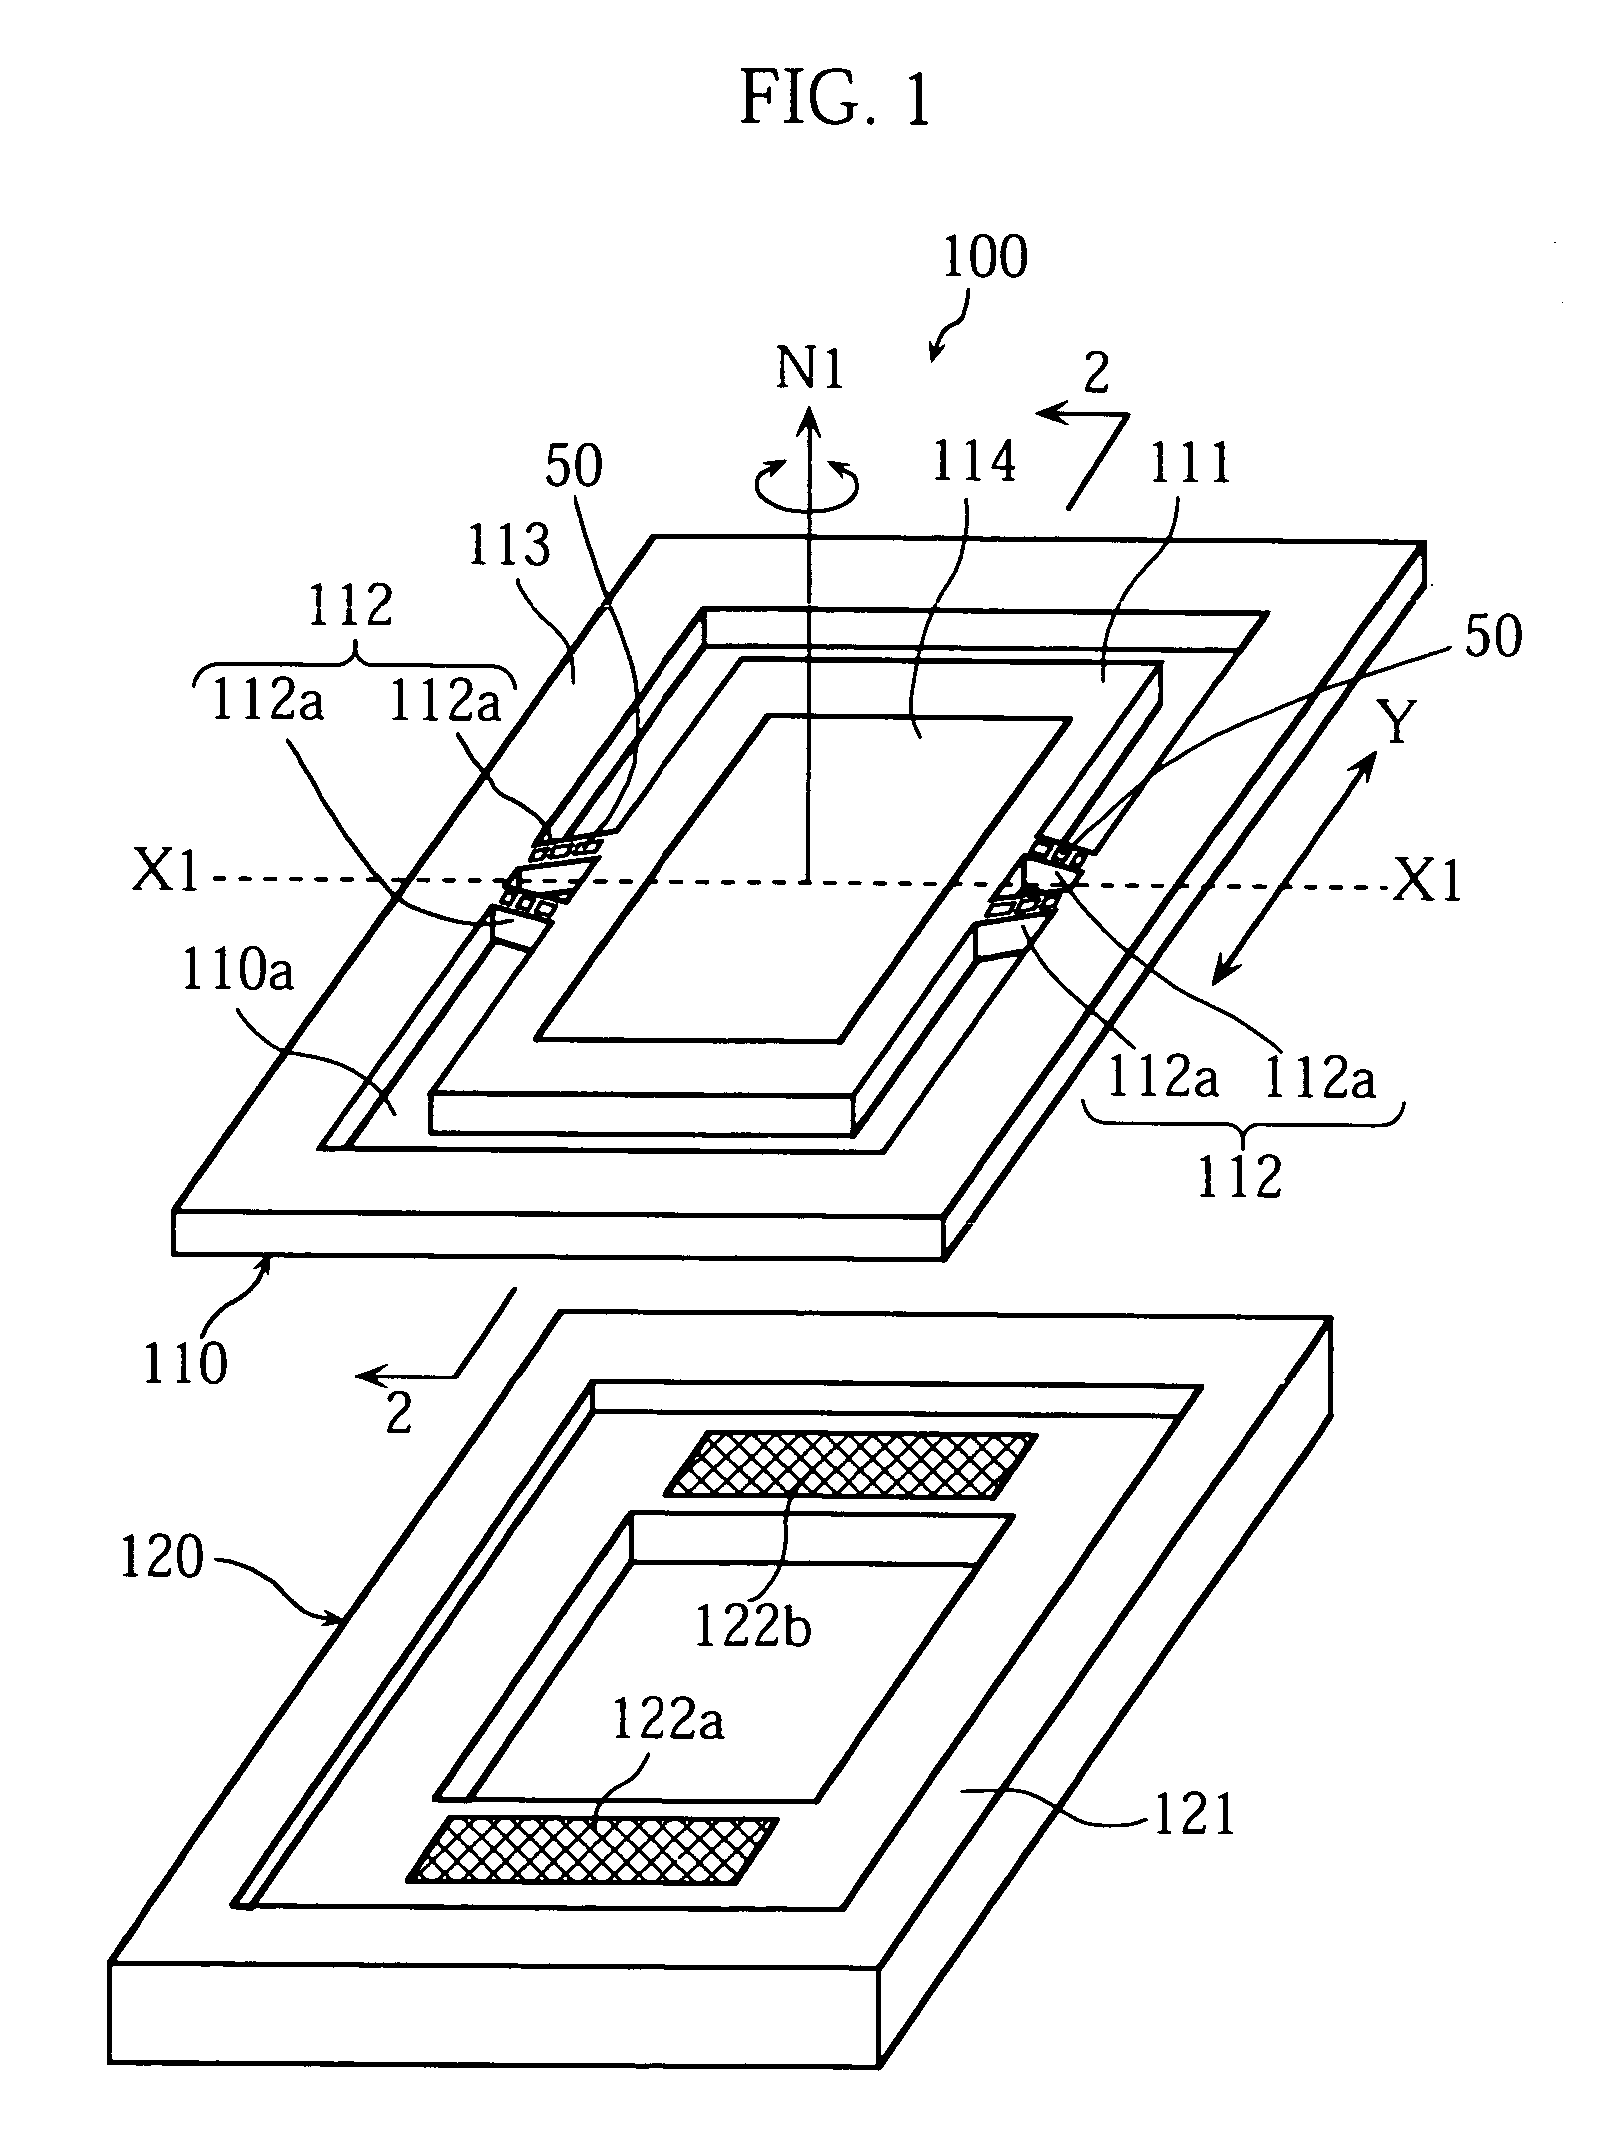 Micro-oscillating element provided with torsion bar